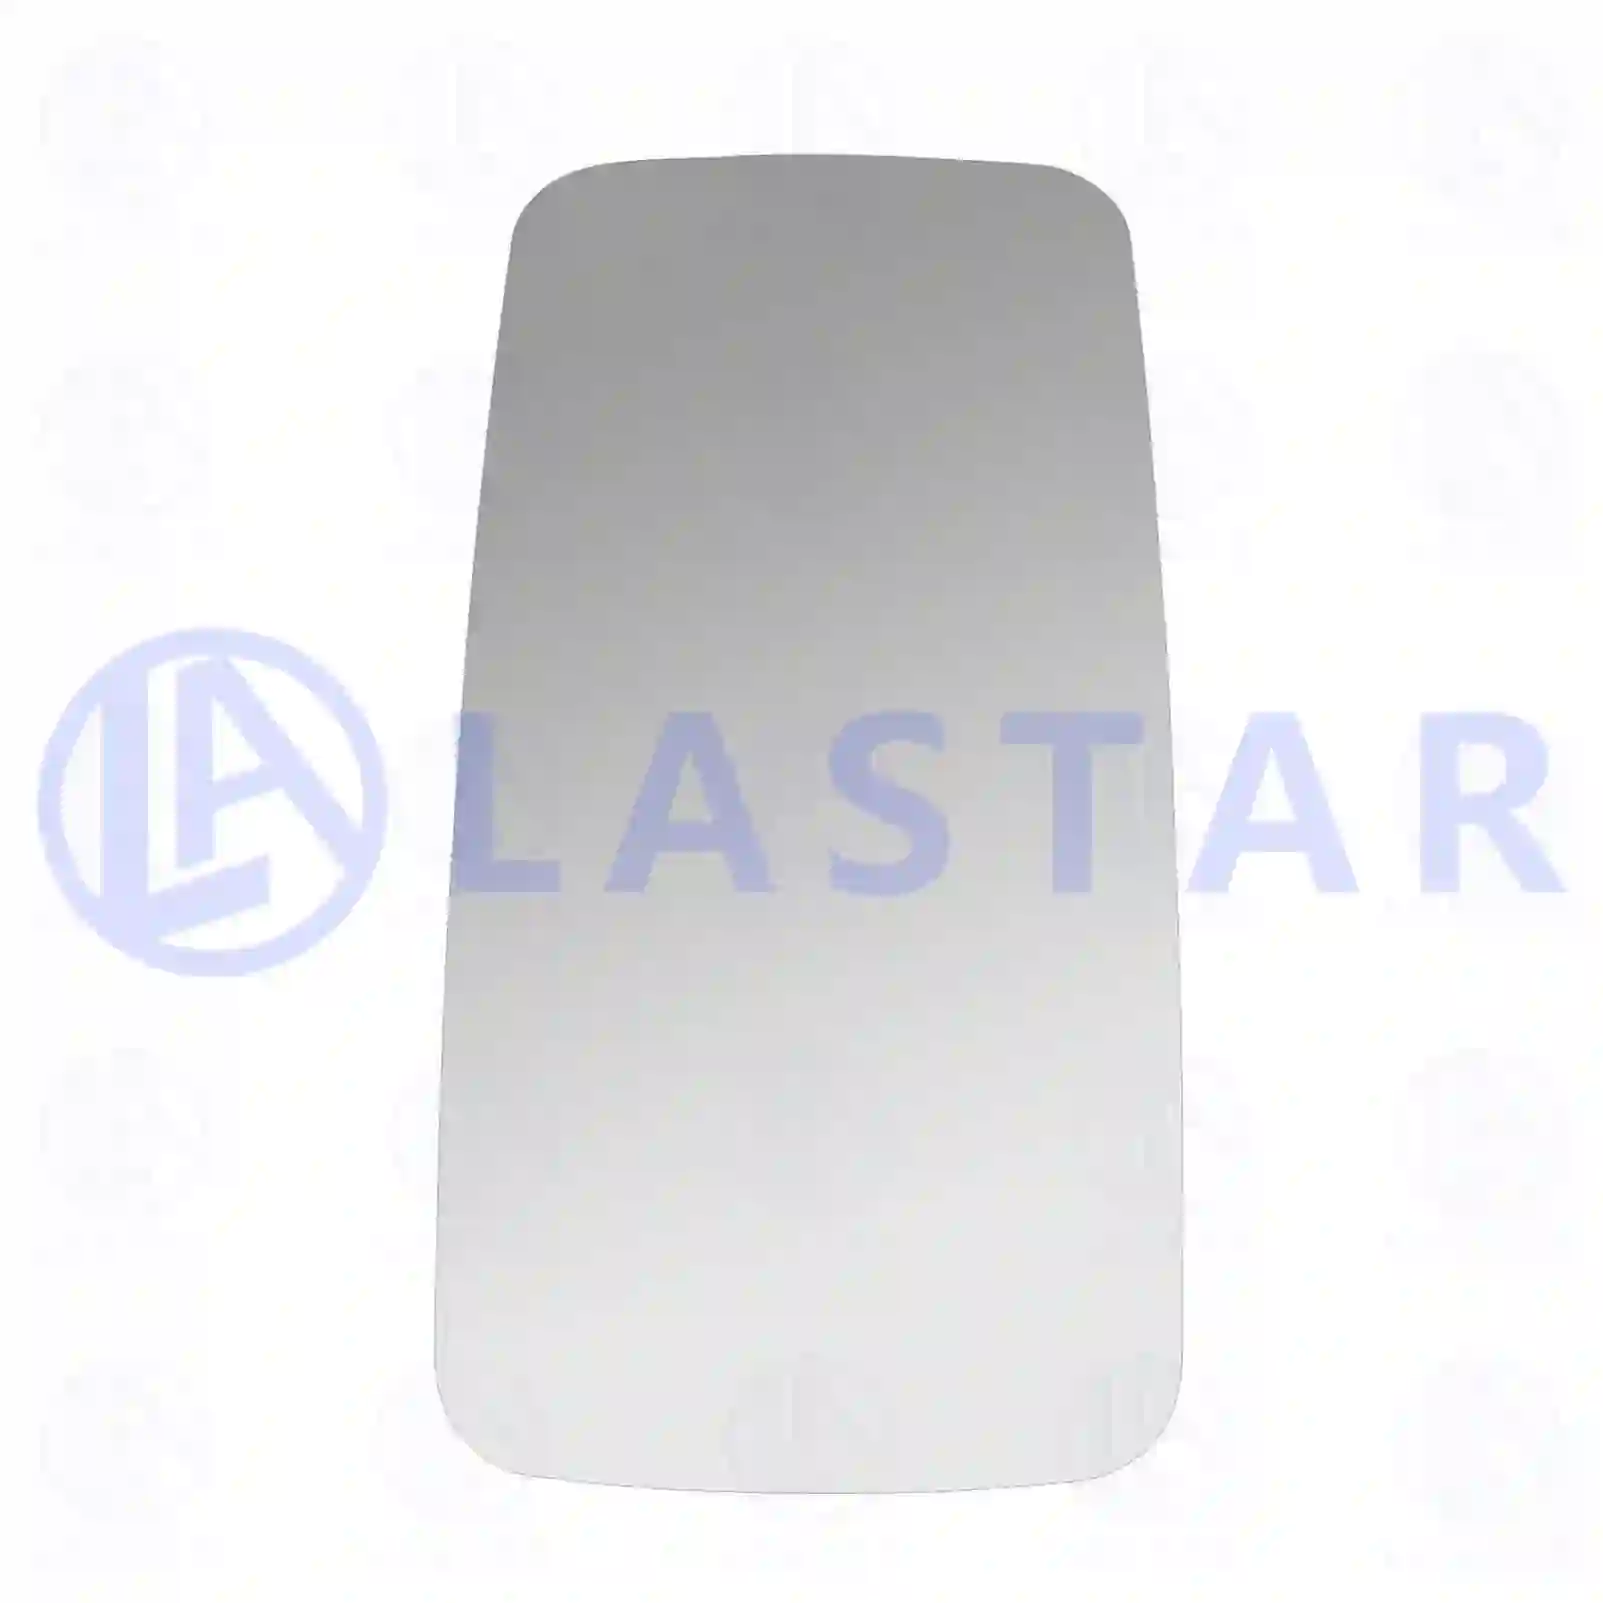 Mirror glass, main mirror, heated, 77720425, 1805713, 5001832947, ZG61000-0008 ||  77720425 Lastar Spare Part | Truck Spare Parts, Auotomotive Spare Parts Mirror glass, main mirror, heated, 77720425, 1805713, 5001832947, ZG61000-0008 ||  77720425 Lastar Spare Part | Truck Spare Parts, Auotomotive Spare Parts